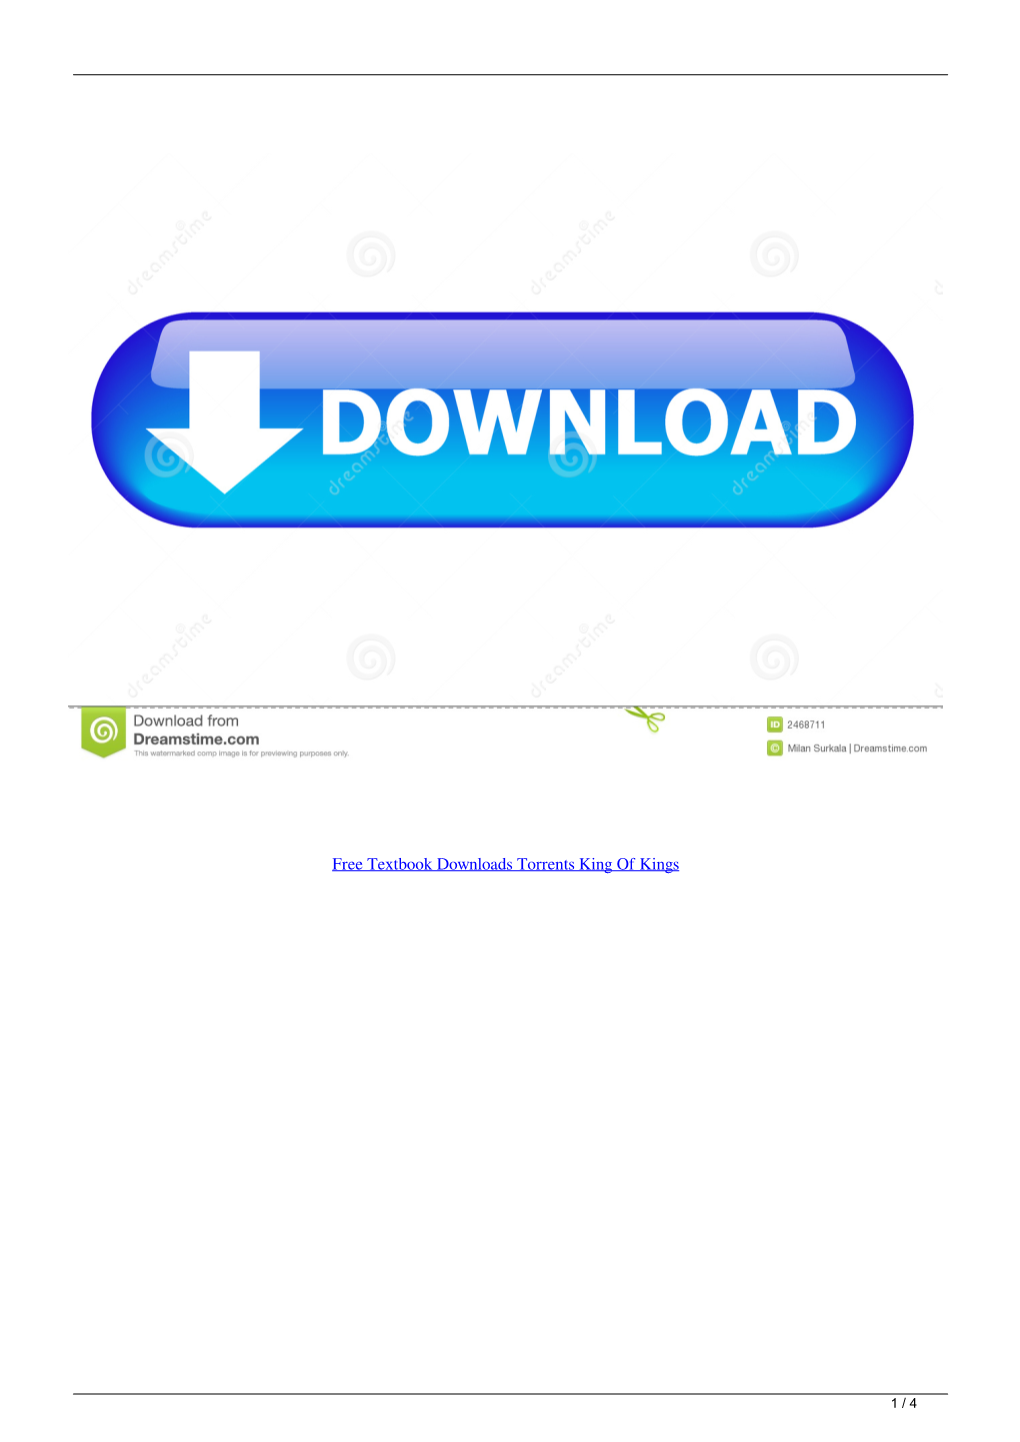 Free Textbook Downloads Torrents King of Kings